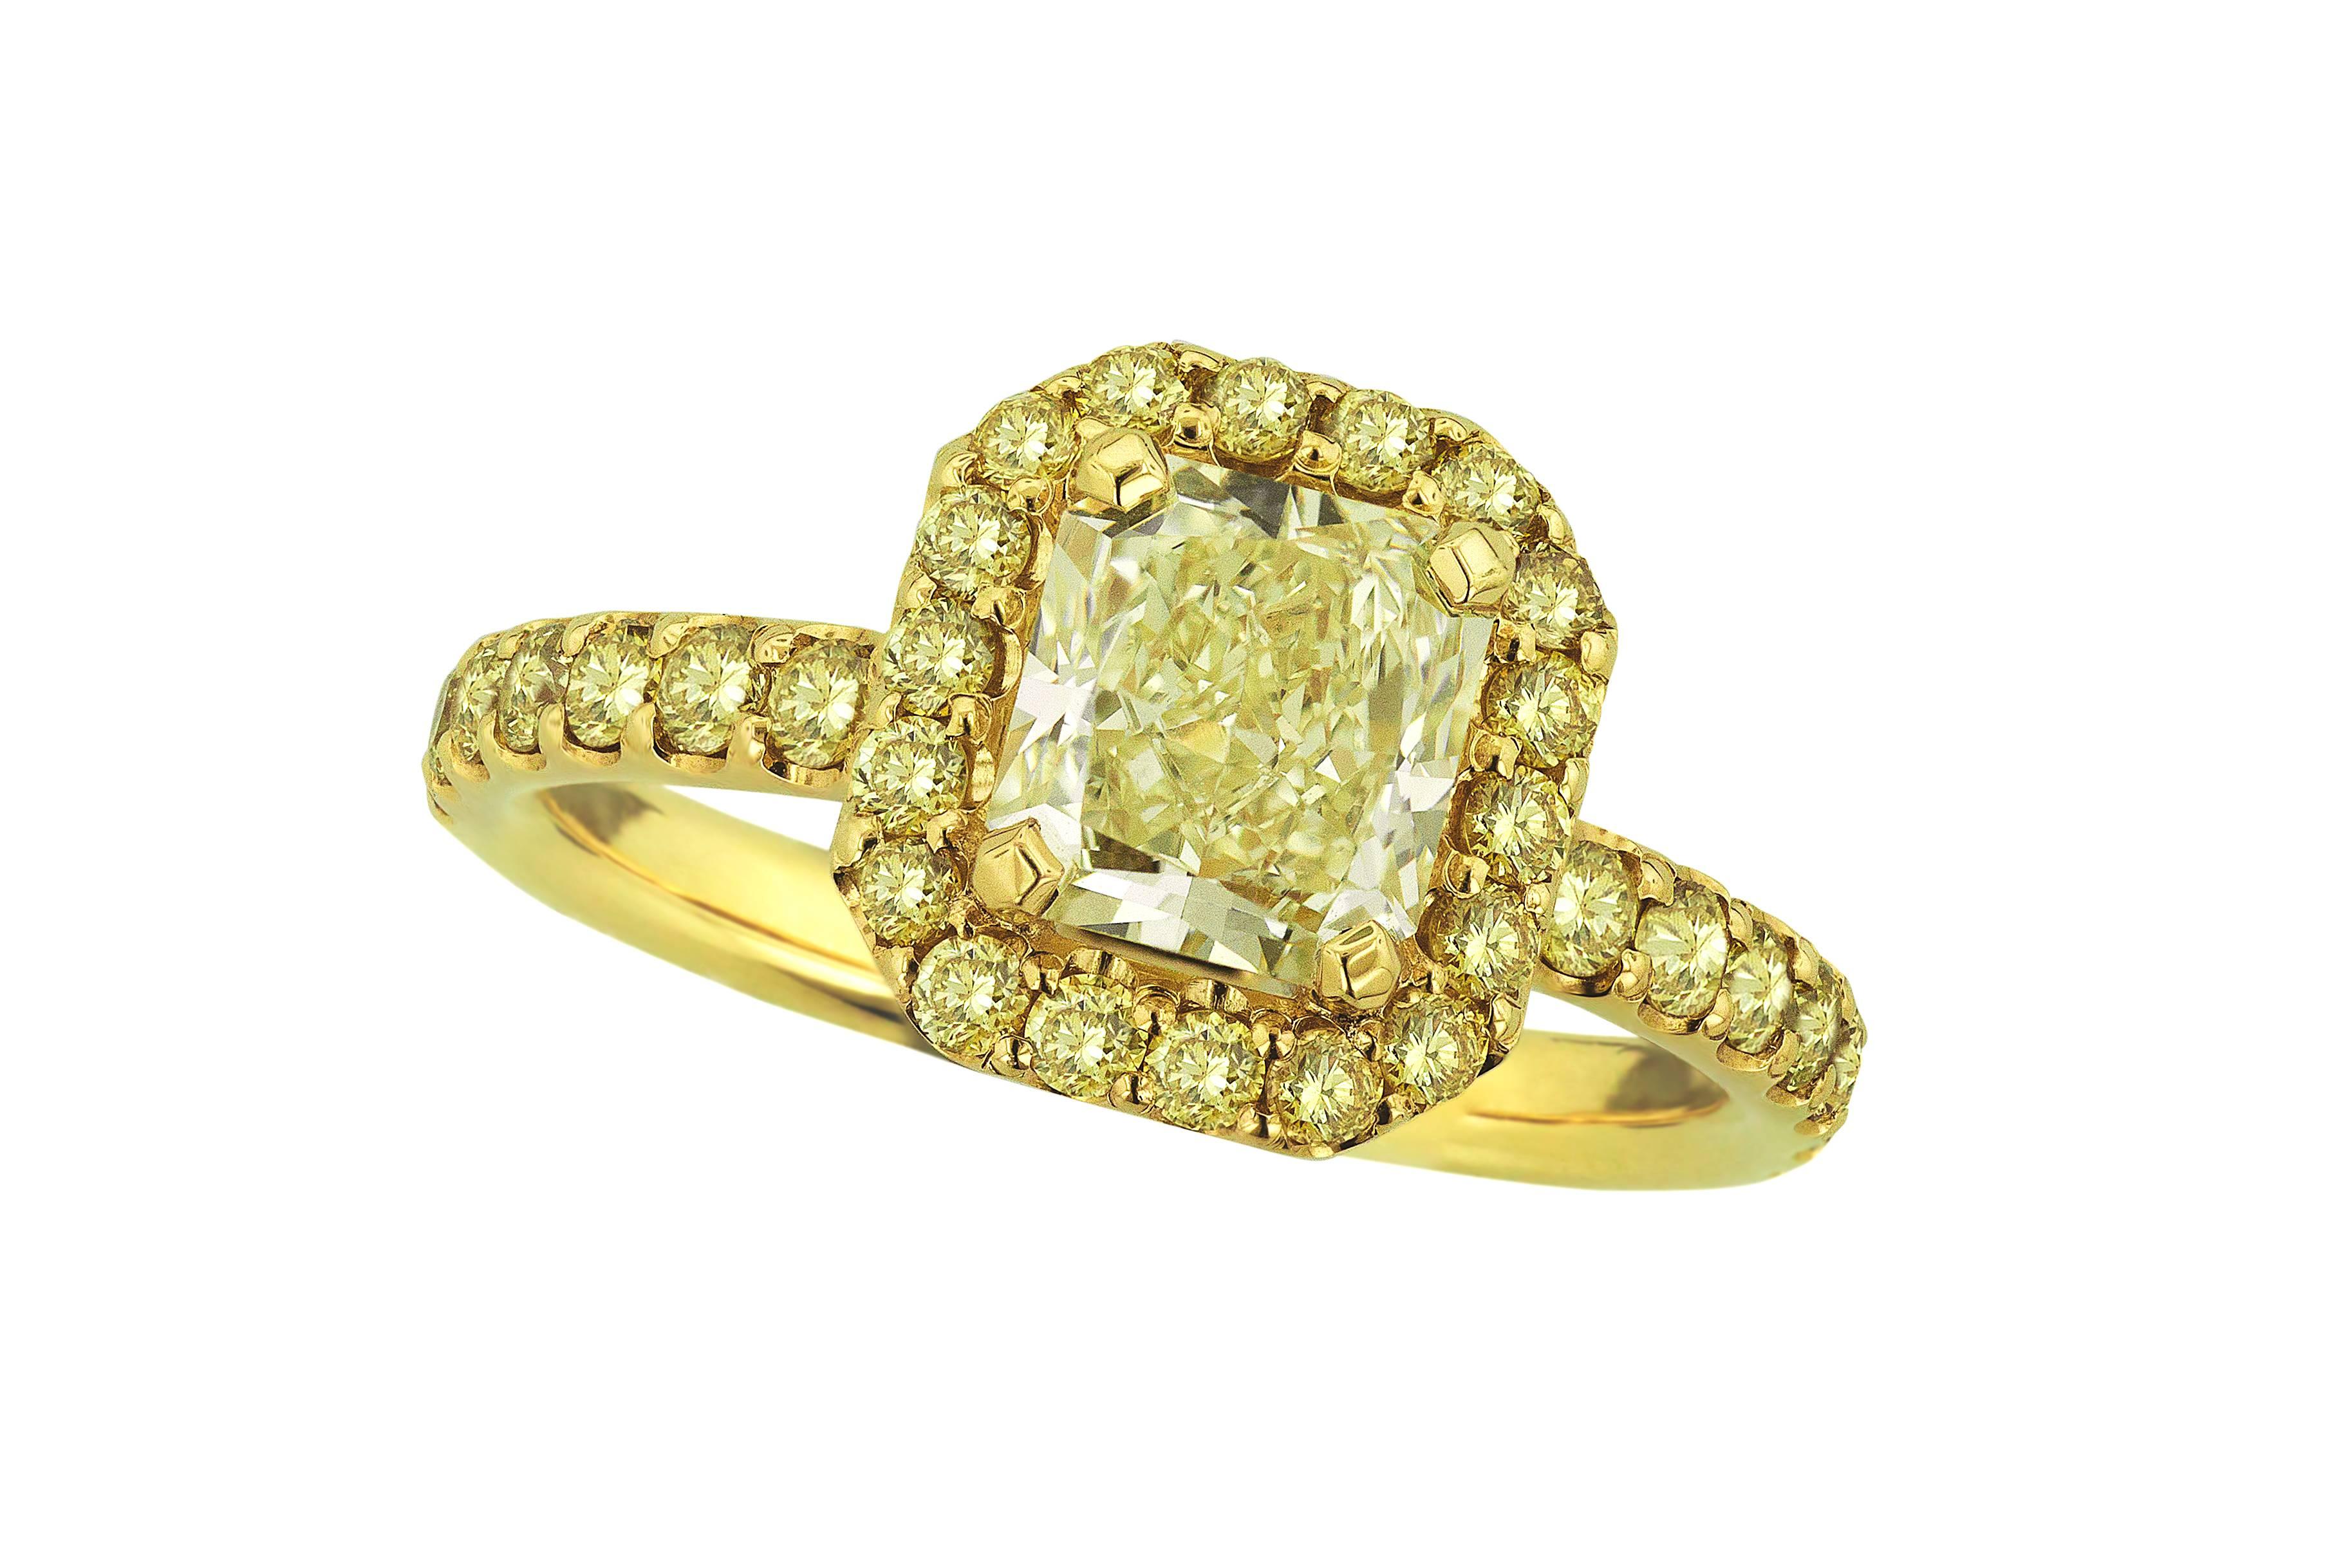 A stunning hand-made creation with spirit, fire and style. Set in 18 karat yellow gold. A dazzling 1.38 carat tinted yellow radiant diamond creates an extraordinary show of light at the ring’s centre. The center stone is encircled by a halo of